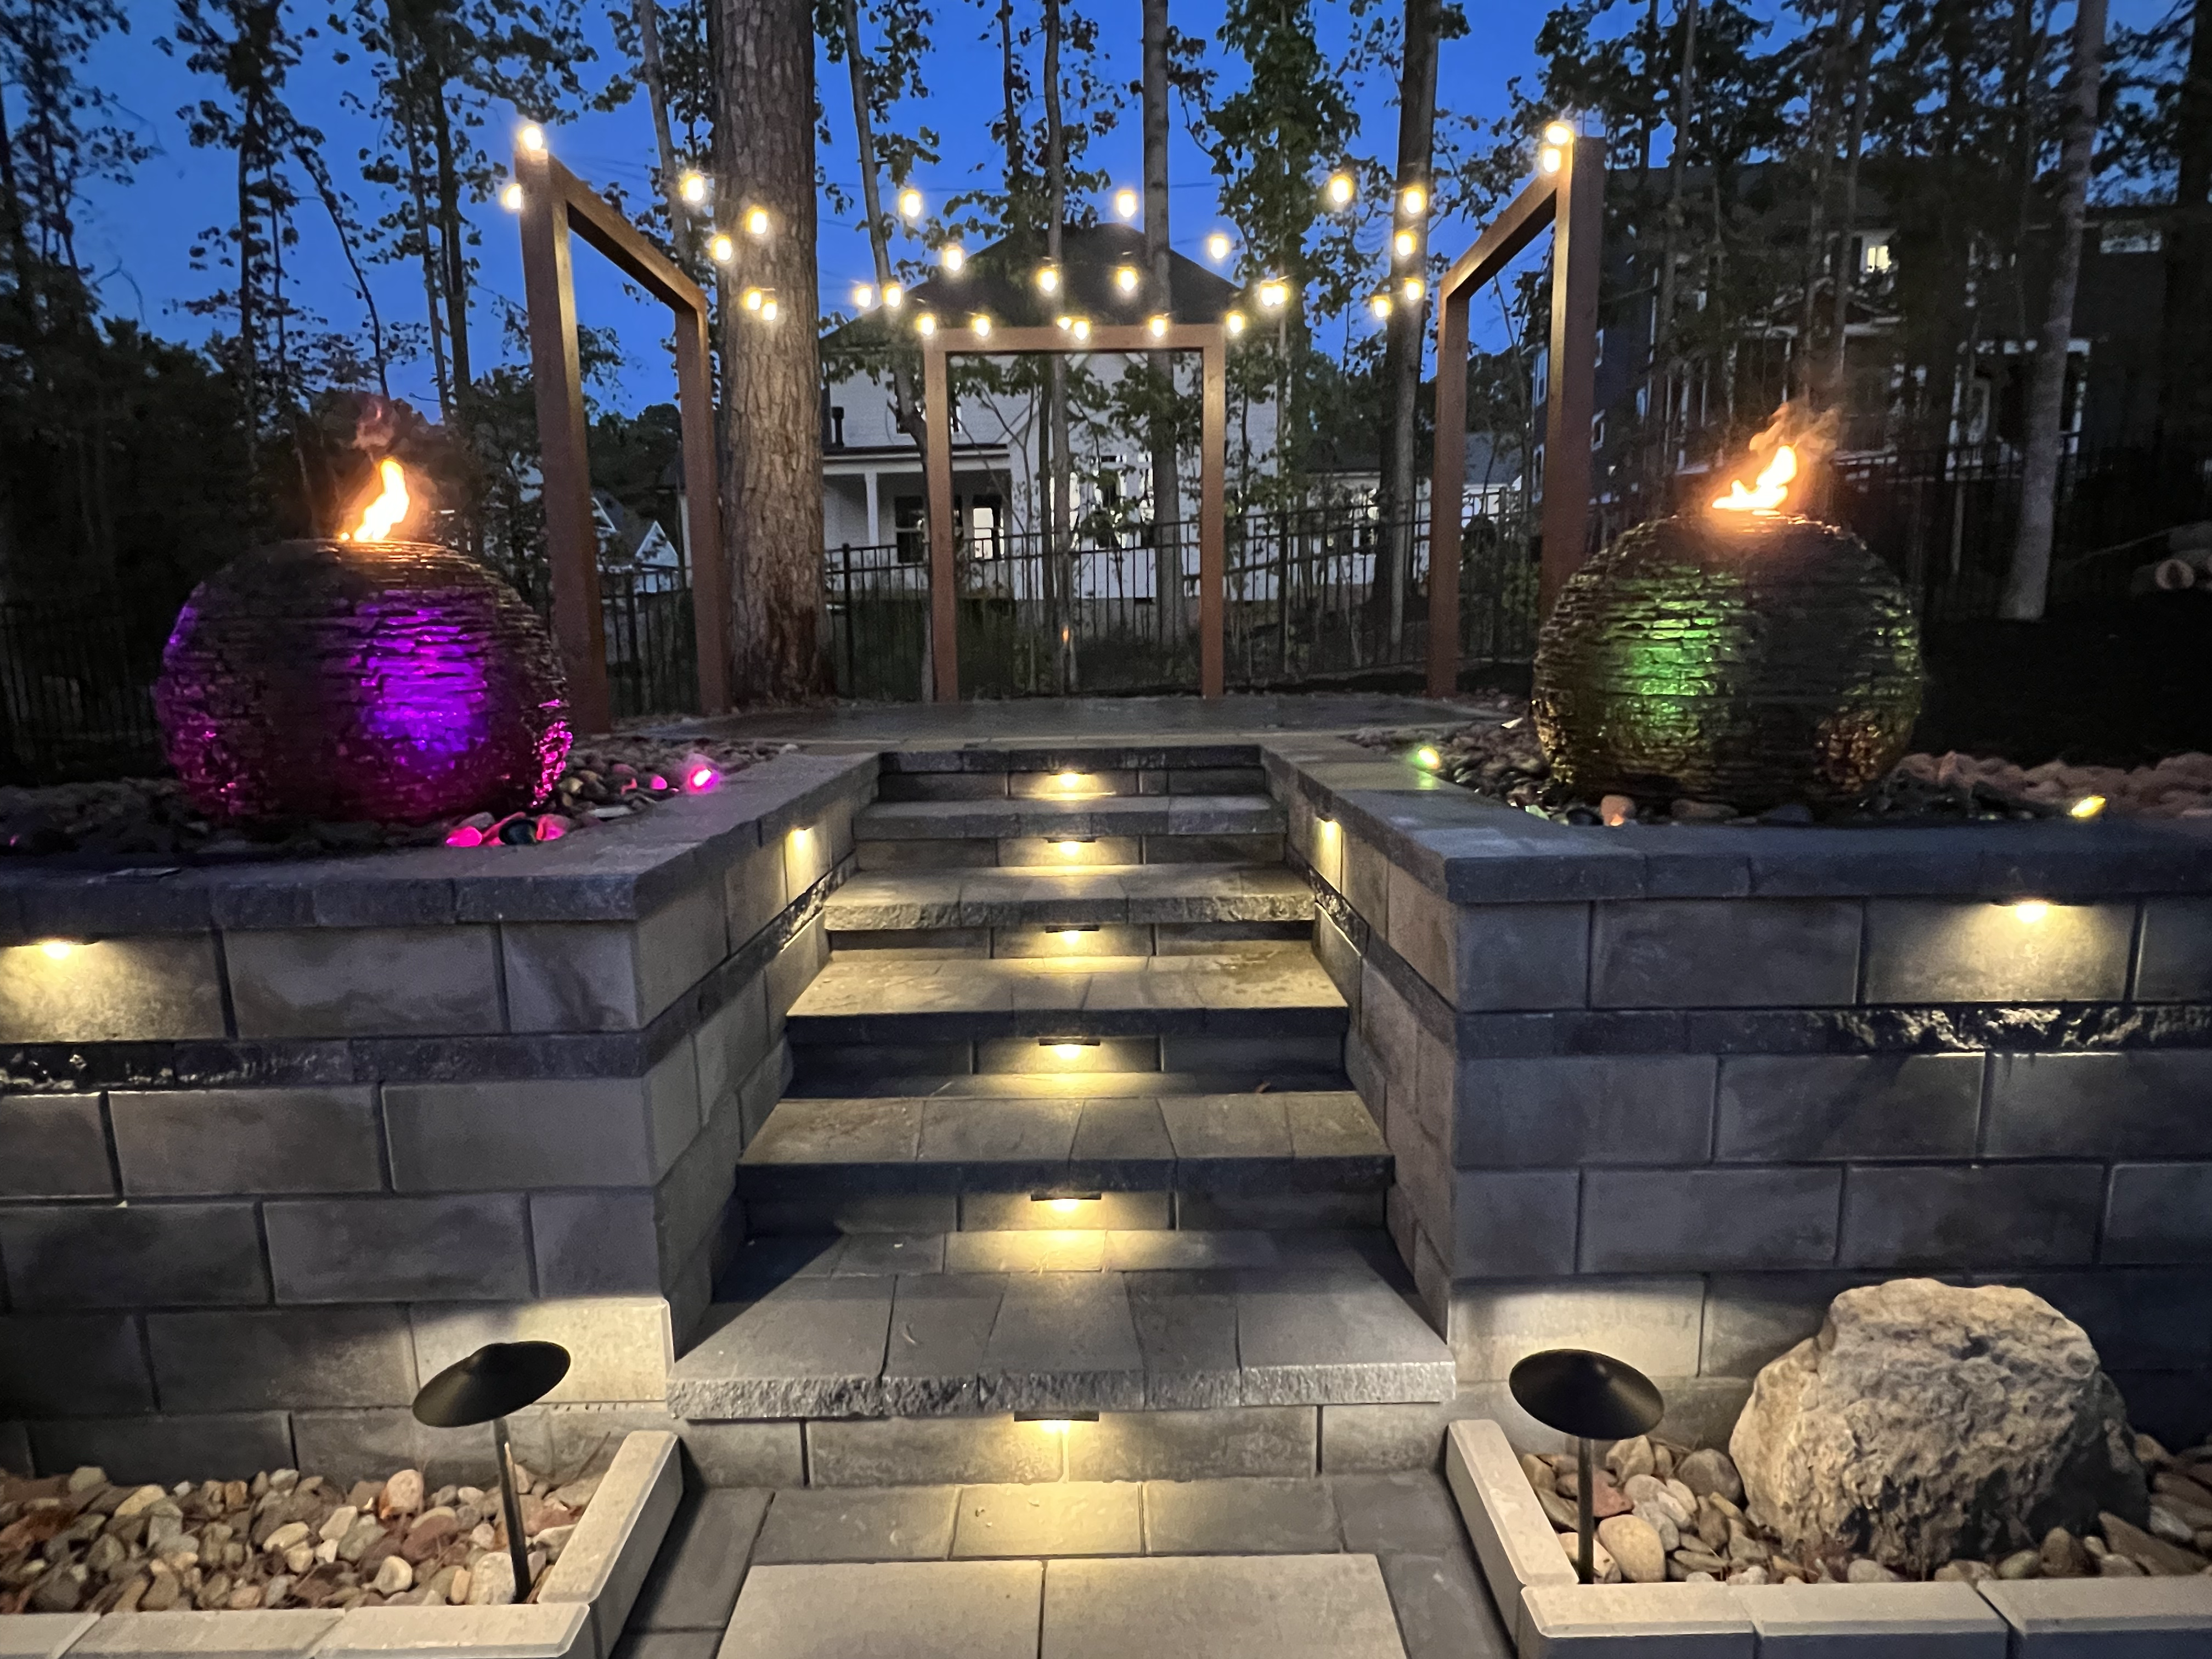 A stone patio with decorated with outdoor lightings such as hanging and embed ones. There's also 2 round rock fountains with fire effects